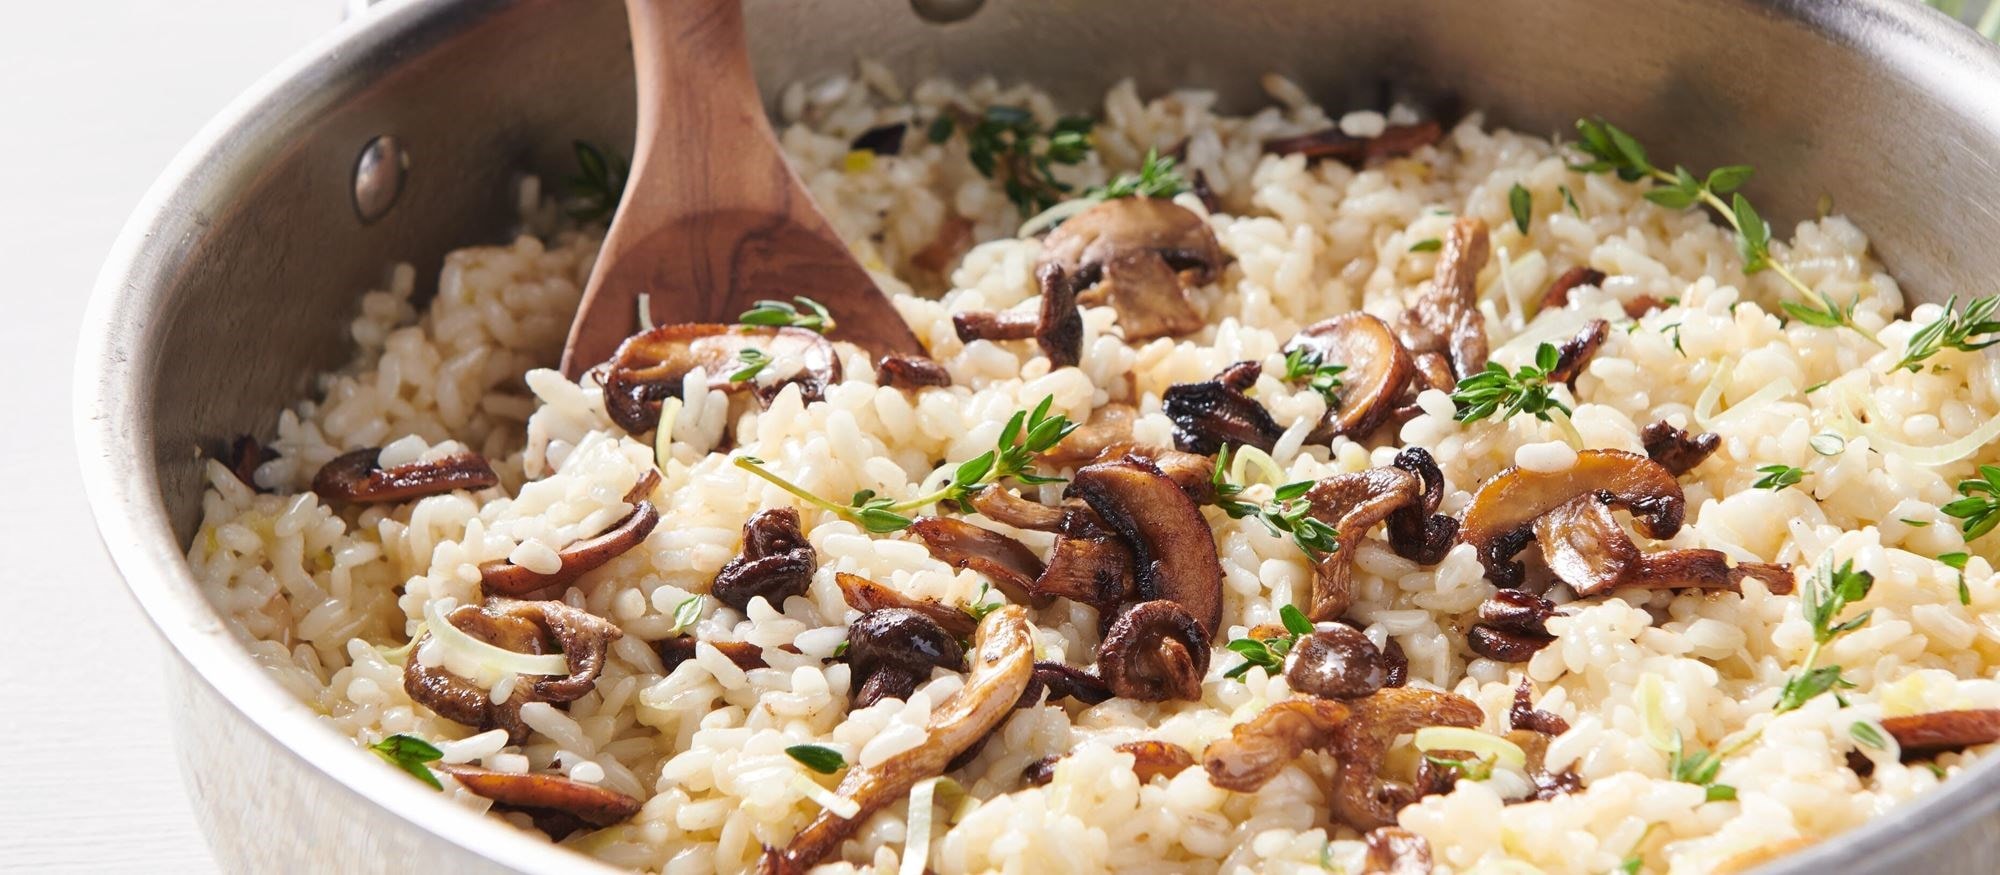 Easy and delicious Mushroom and Parmesan Risotto recipe using the French Top Mode setting of your Wolf Dual Fuel Range